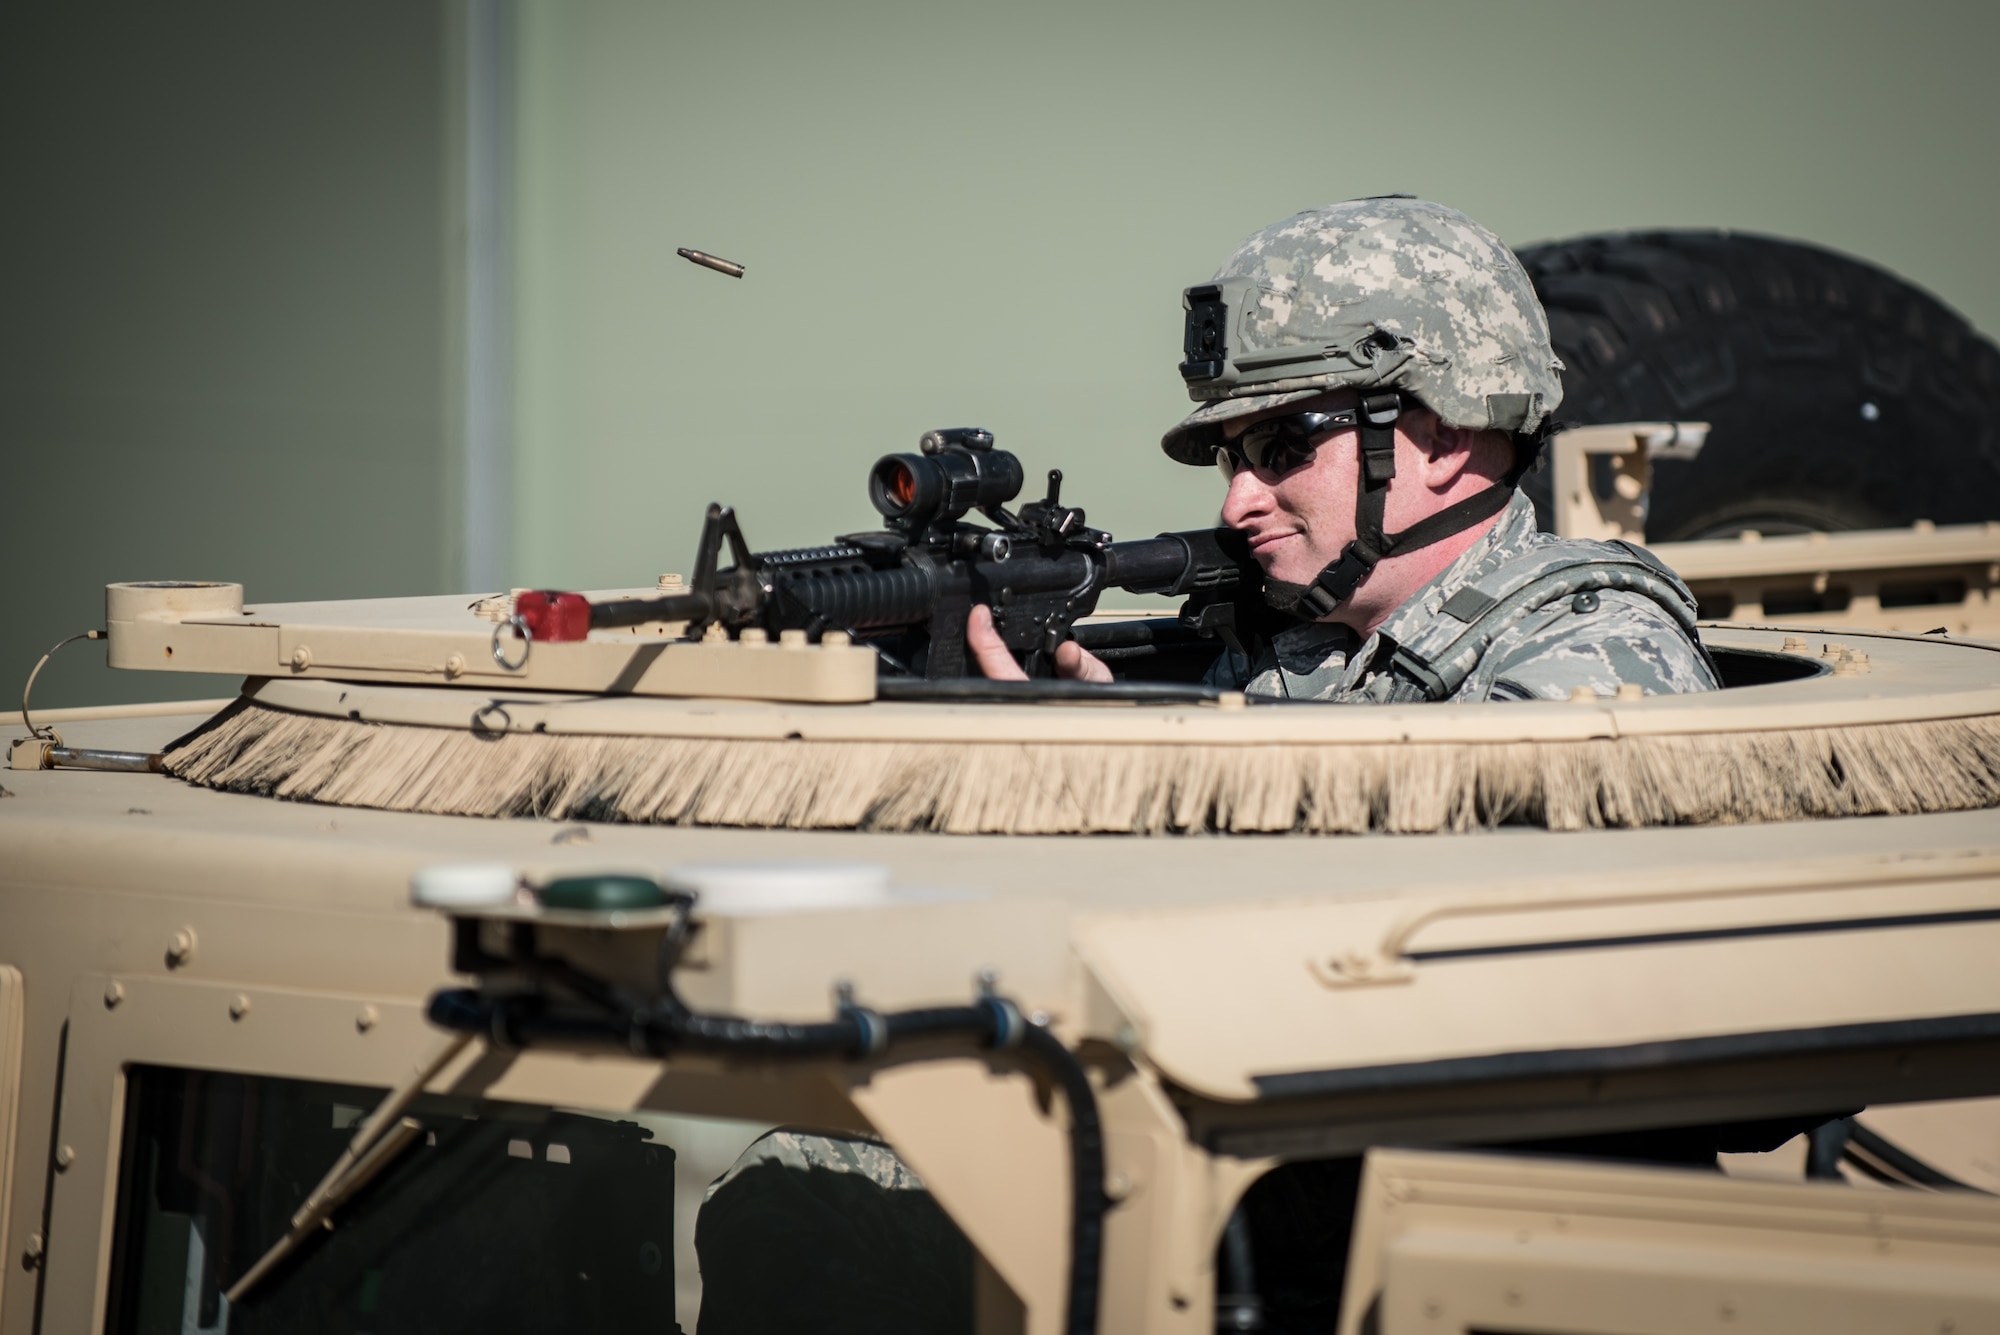 Senior Airman Jacob Faith, a Fire Team member from the Kentucky Air National Guard’s 123rd Security Forces Squadron, defends his position under fire while protecting a simulated Afghan compound during training at Fort Knox, Ky., Oct. 20, 2015. Faith and his fellow Airmen also executed a search for a downed pilot. (U.S. Air National Guard photo by Maj. Dale Greer)